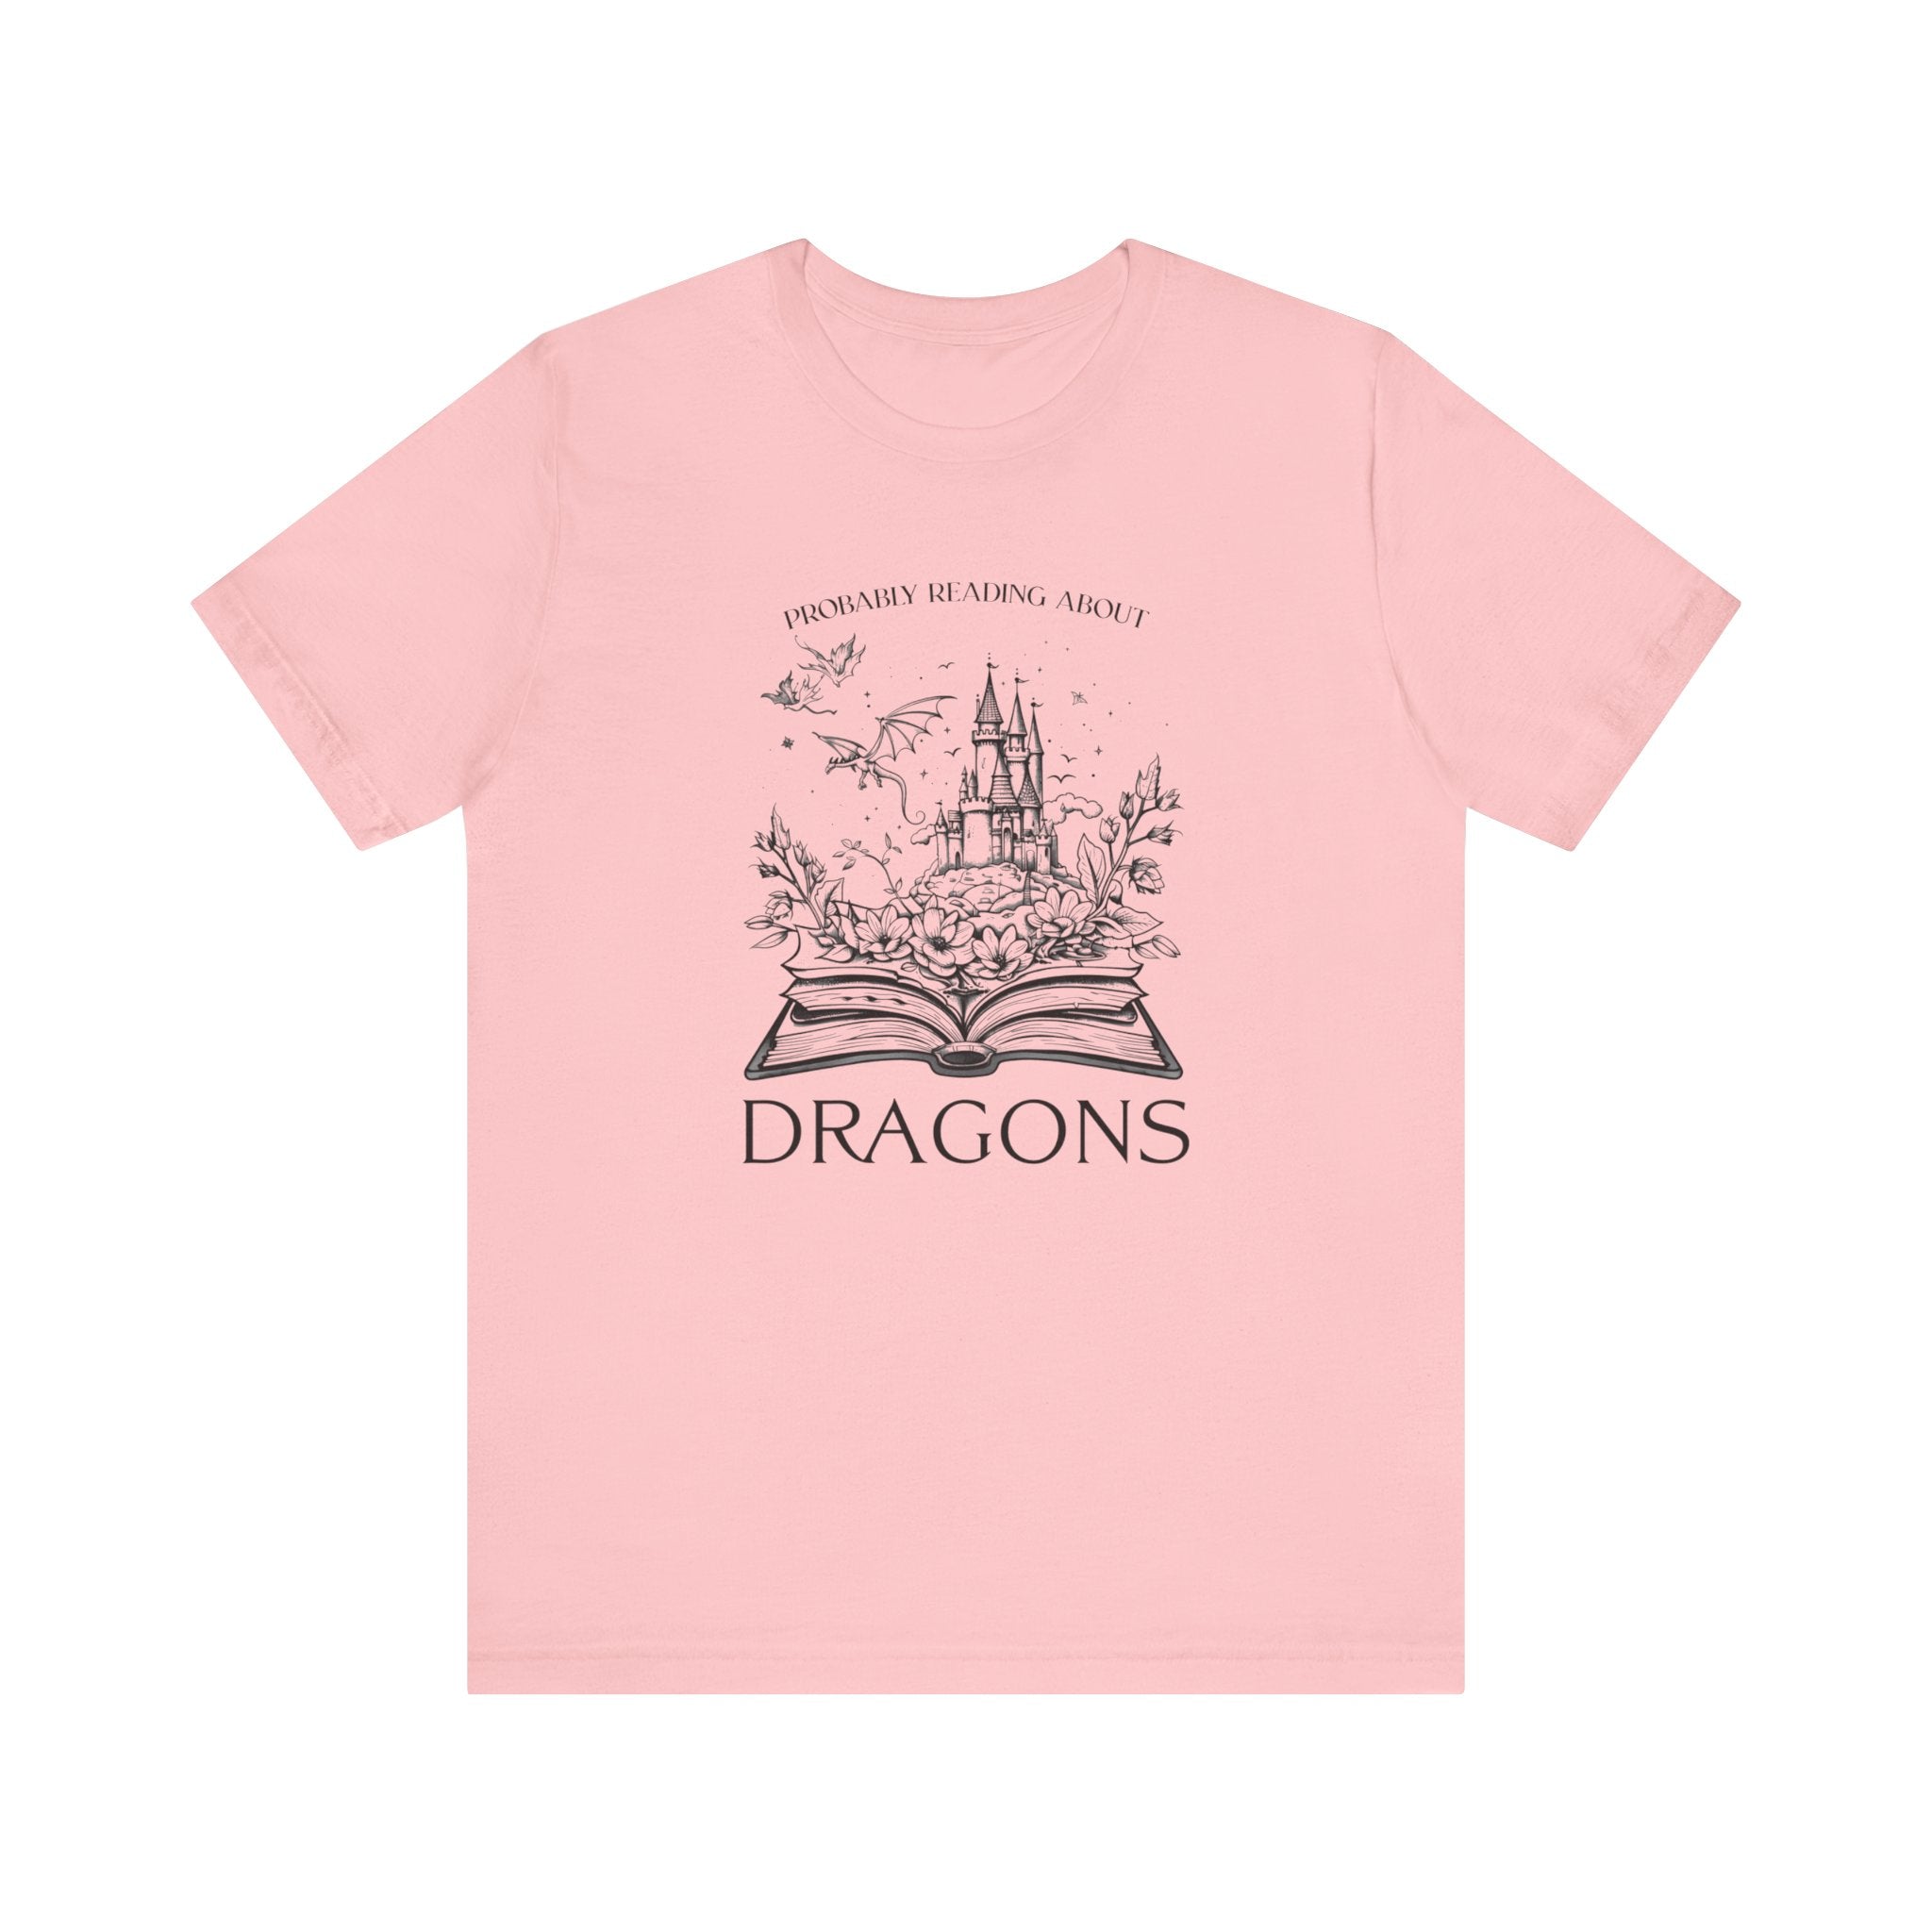 Probably Reading About Dragons T-Shirt, Fantasy Shirt, Gamer Shirt, Fantasy Reader Shirt